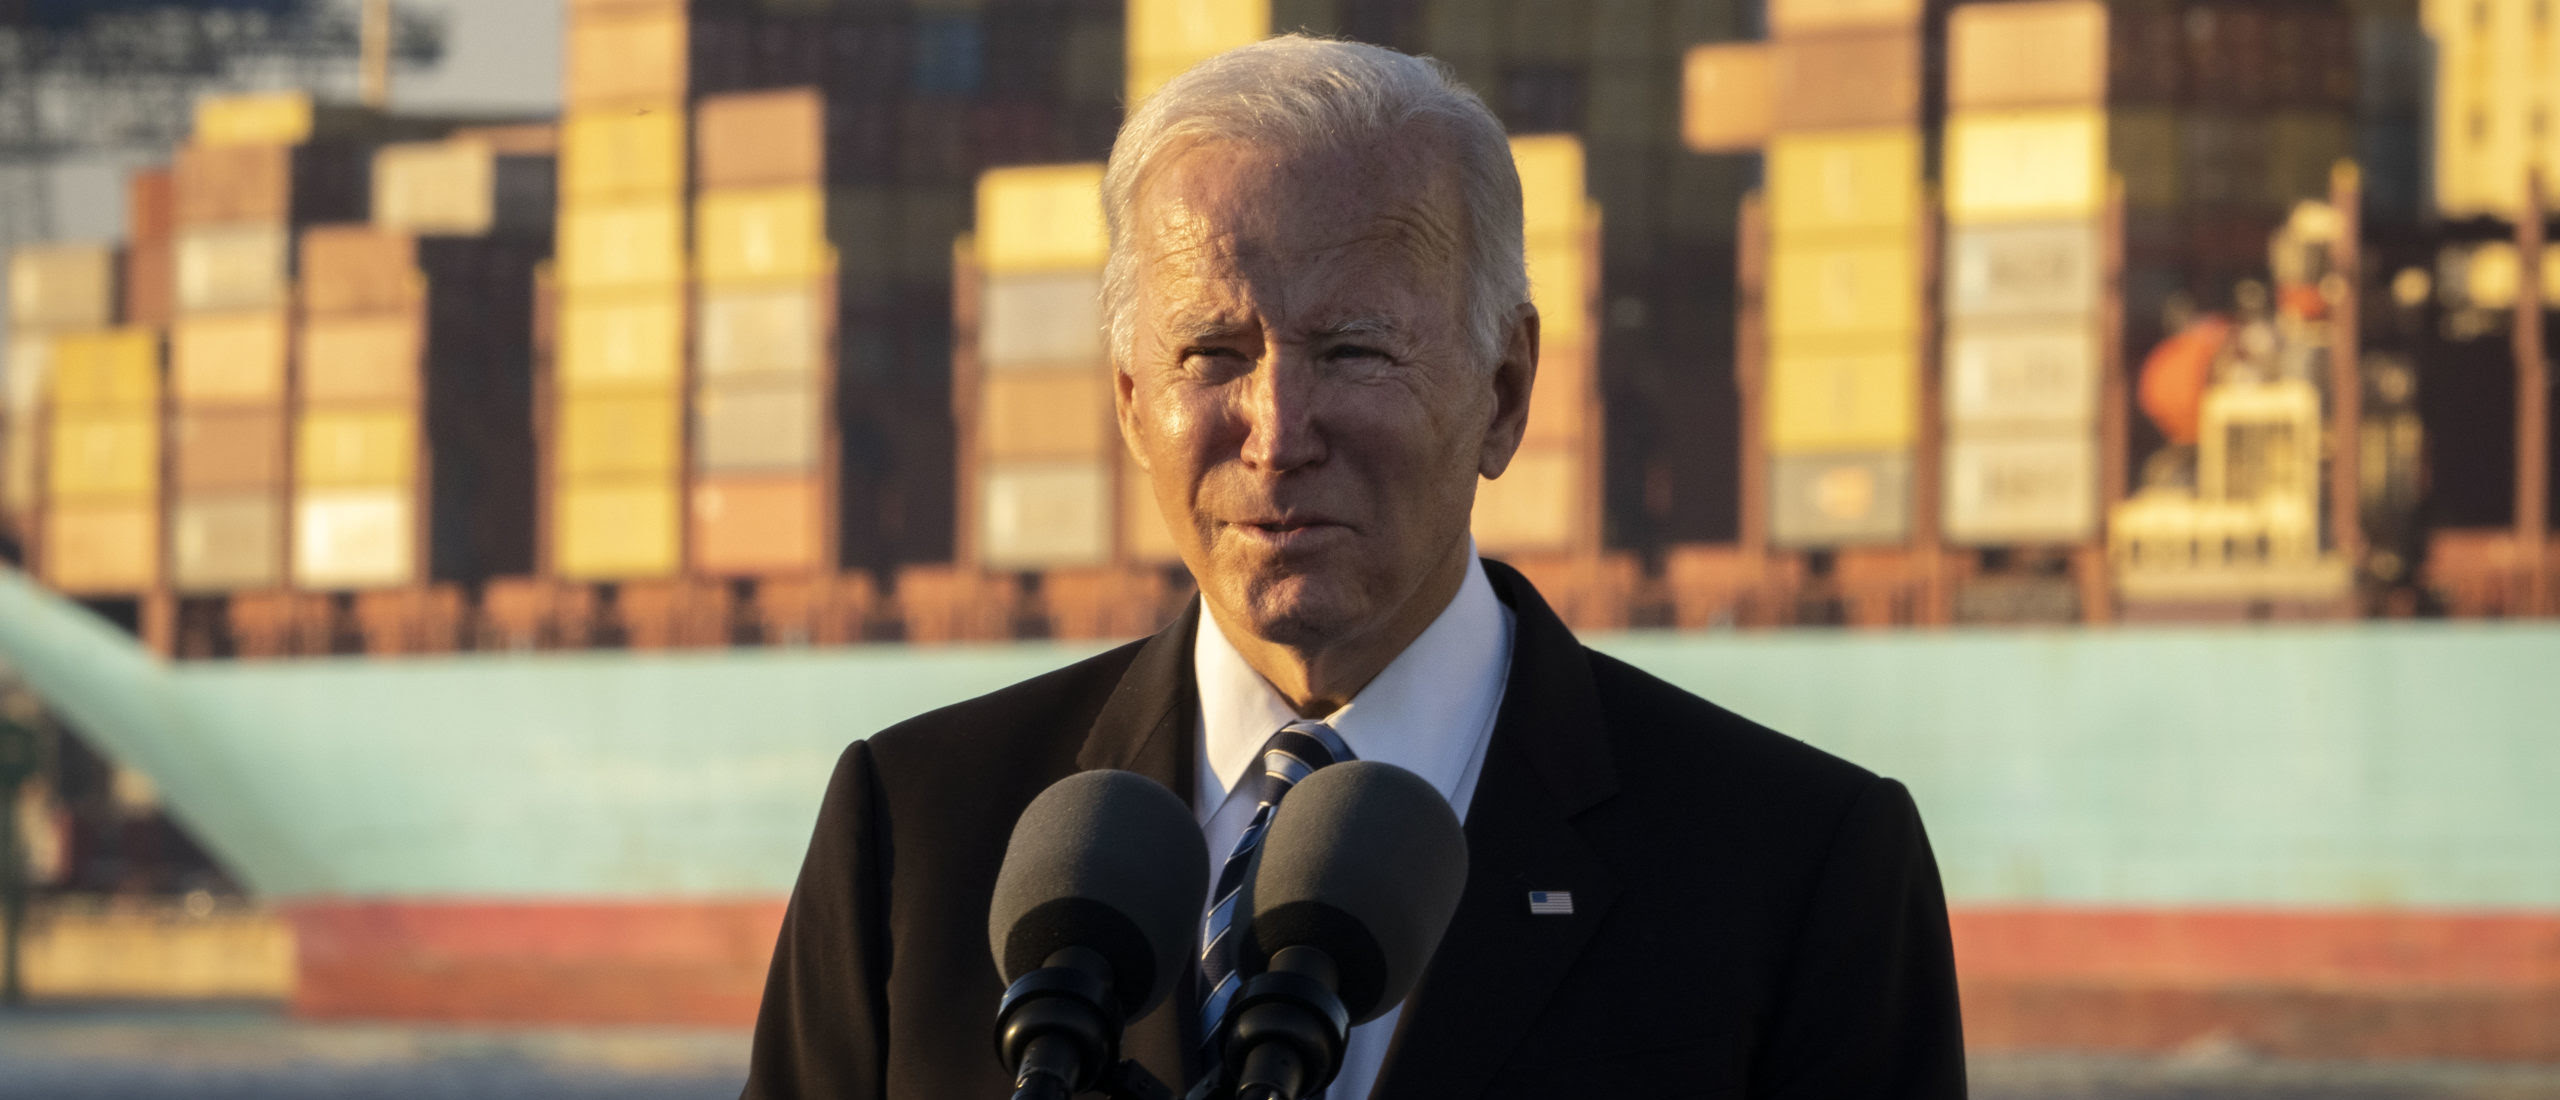 POLL: Almost Half Of Americans Say Biden Has Accomplished ‘Little Or Nothing, Despite Infrastructure Bill